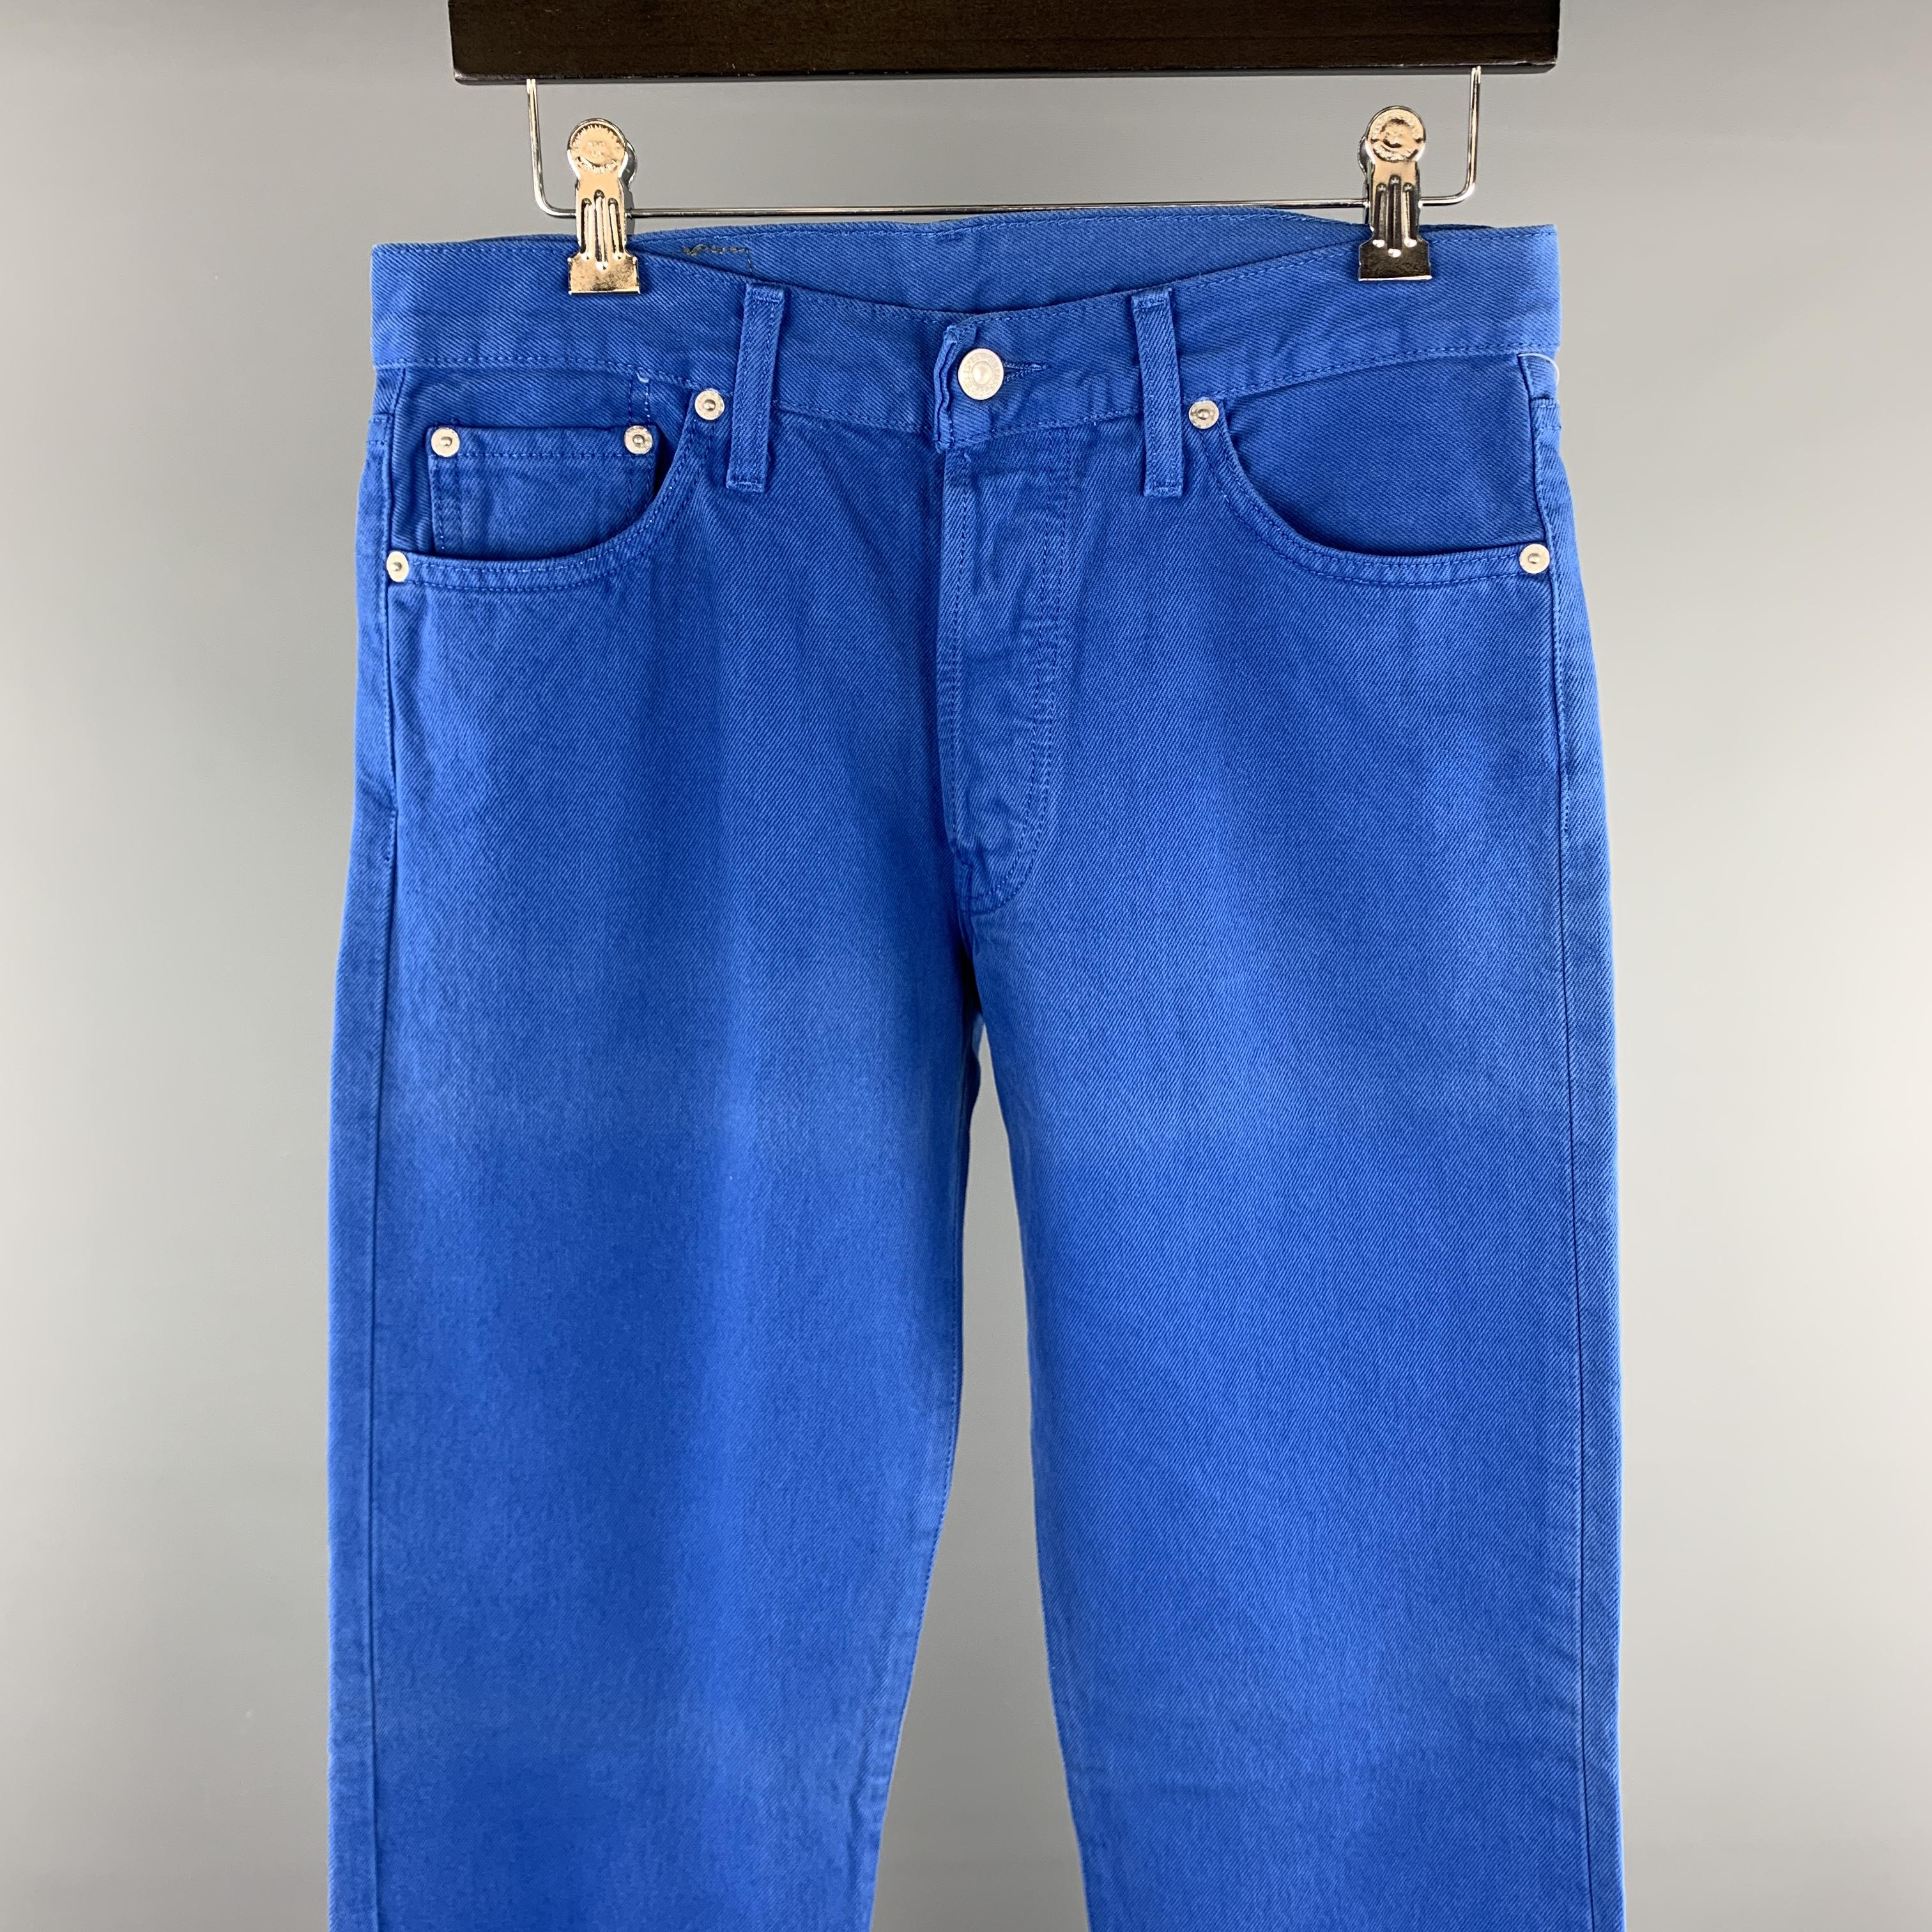 LEVI'S x 501 XX ALIFE casual pants comes in a blue cotton featuring a jean cut style and a button fly closure. 


Very Good Pre-Owned Condition.
Marked: 30 x 30

Measurements:

Waist: 30 in. 
Rise: 9 in. 
Inseam: 30 in.

 